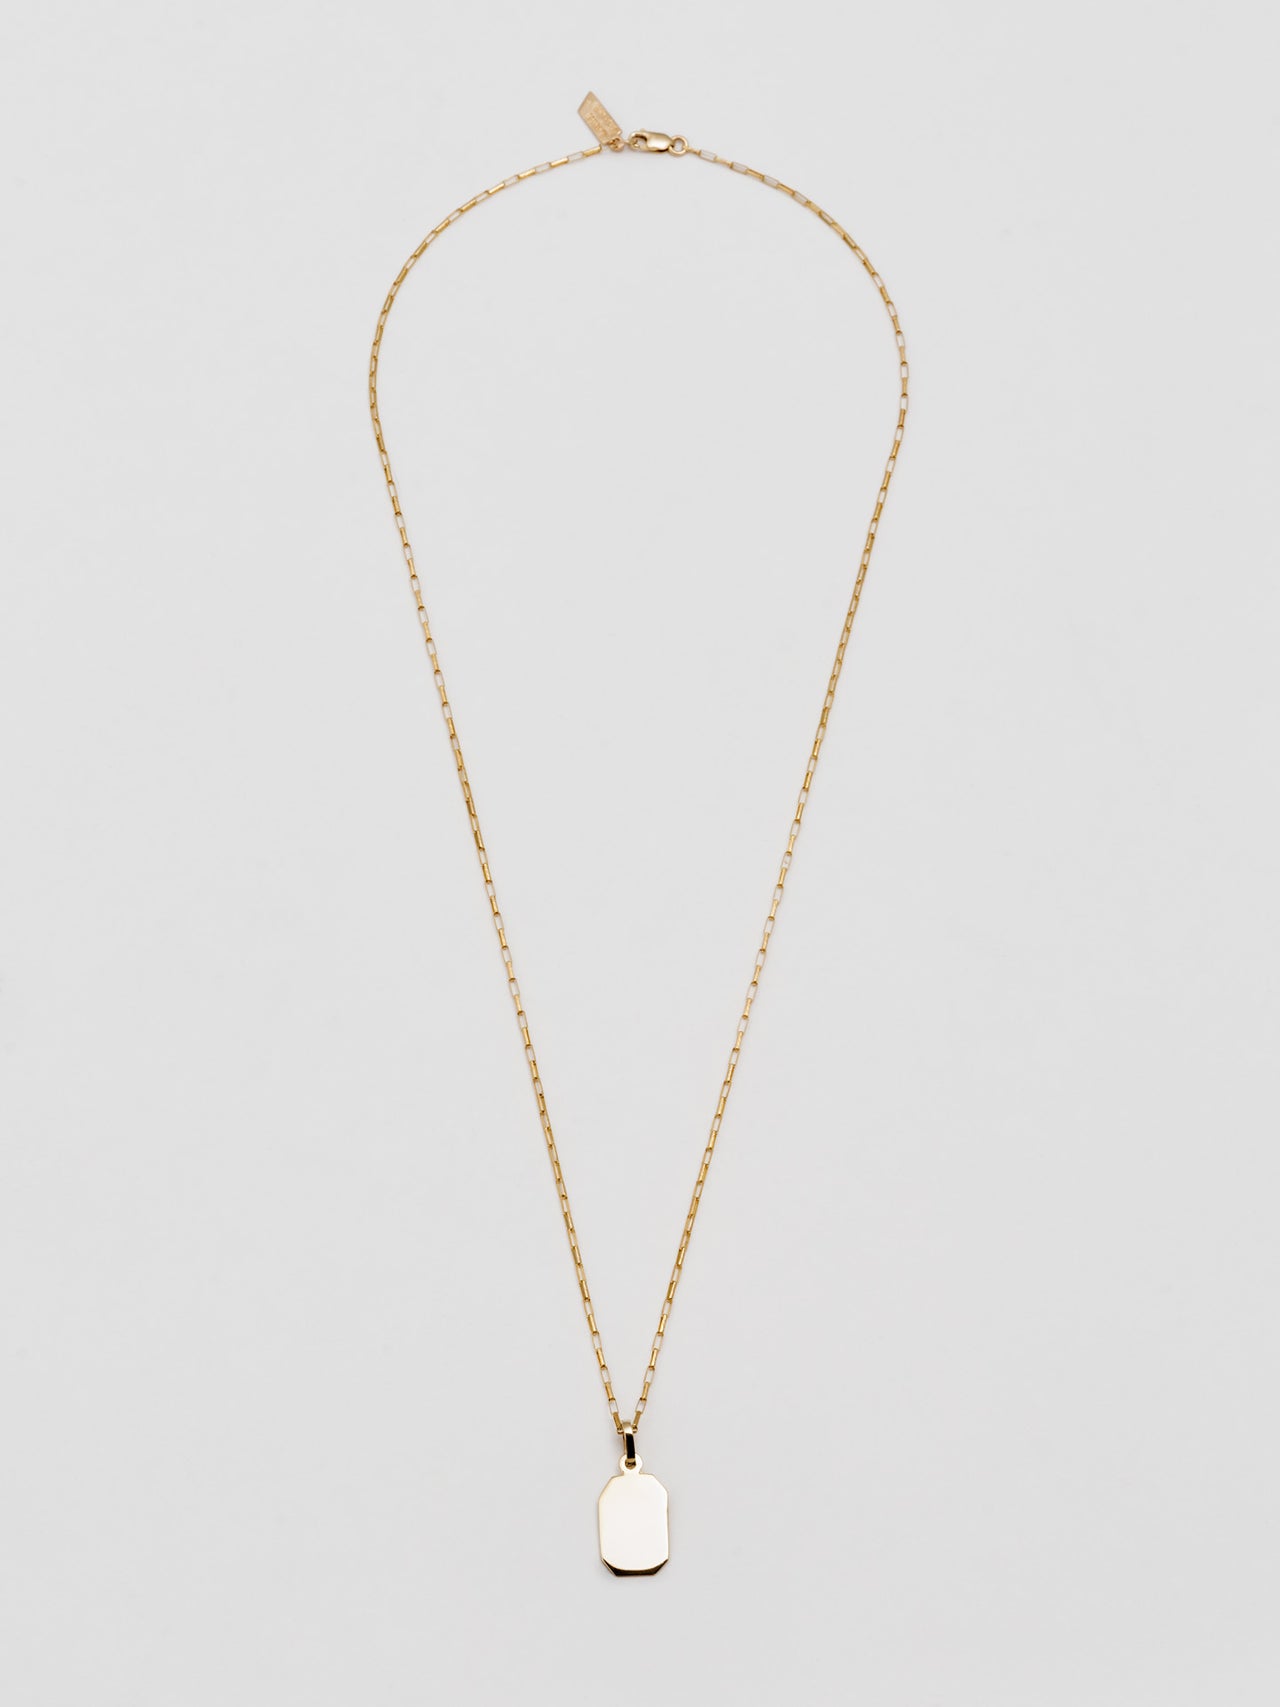 14kt Octagonal Id Charm + Elongated Box Chain pictured on light grey background.